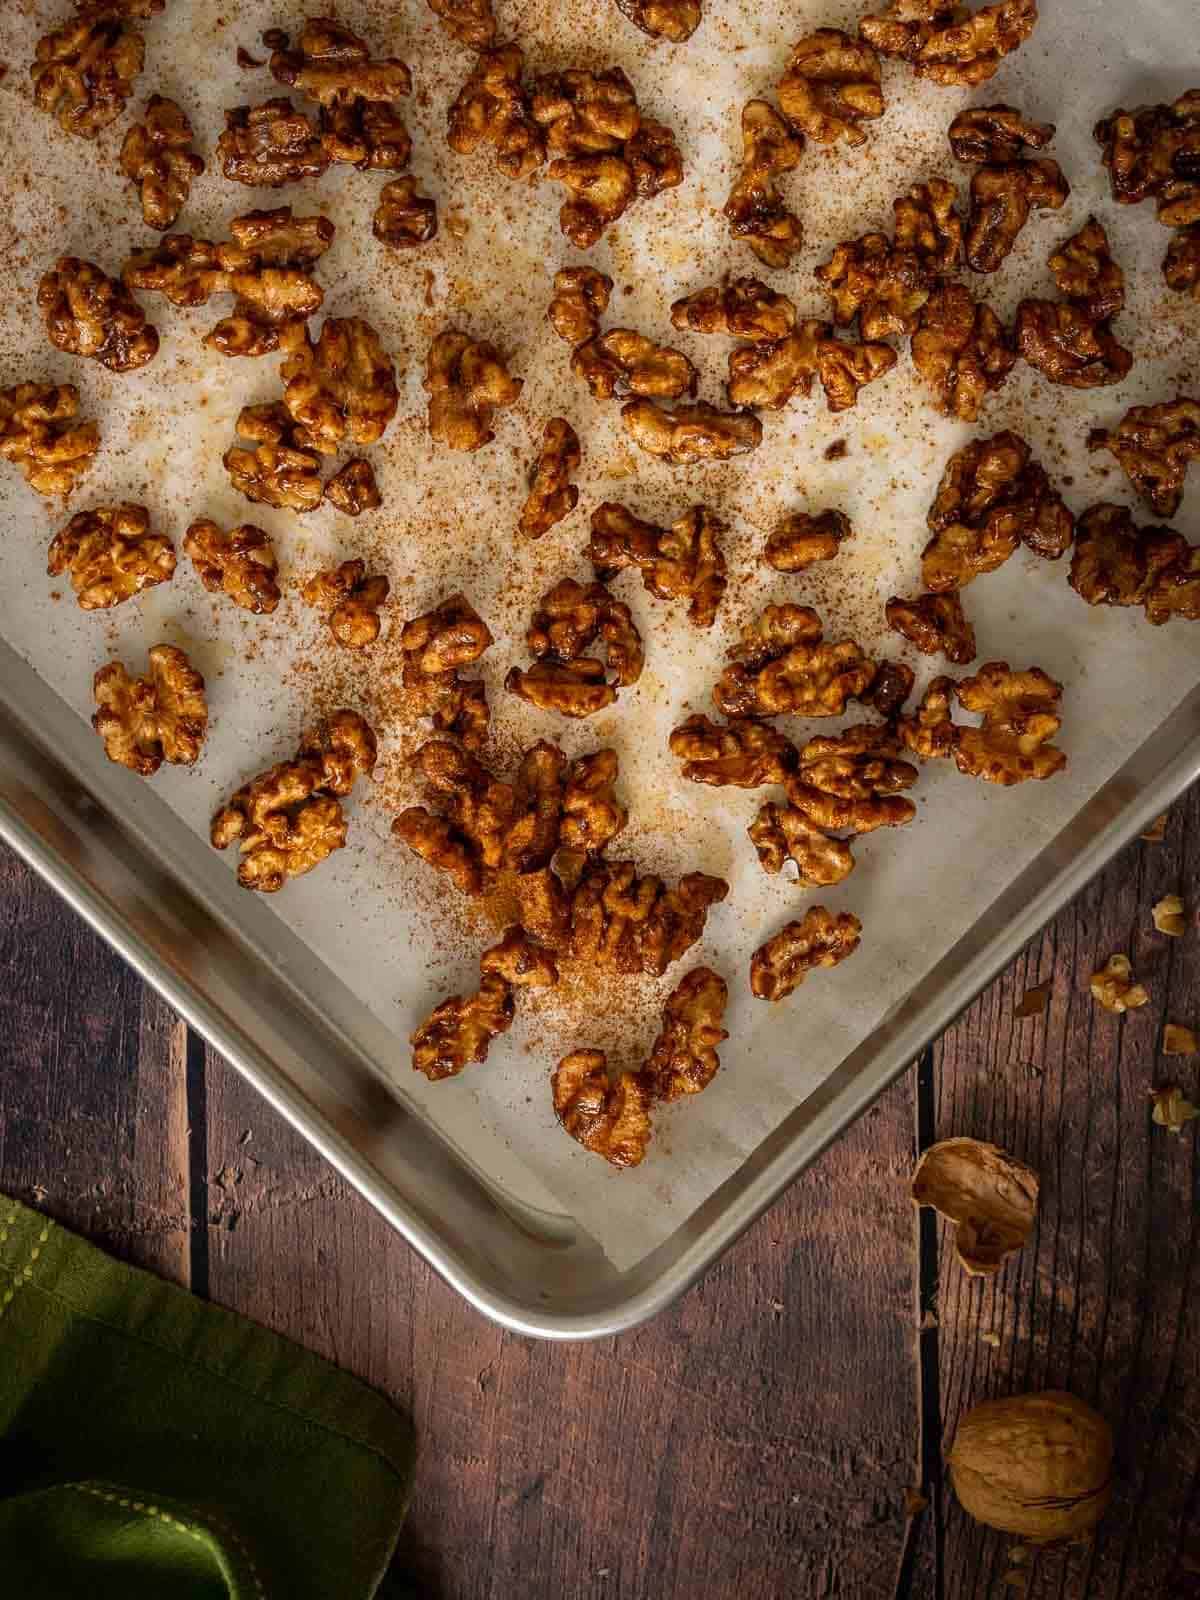 brown sugar candied walnuts in a baking tray with parchment paper.